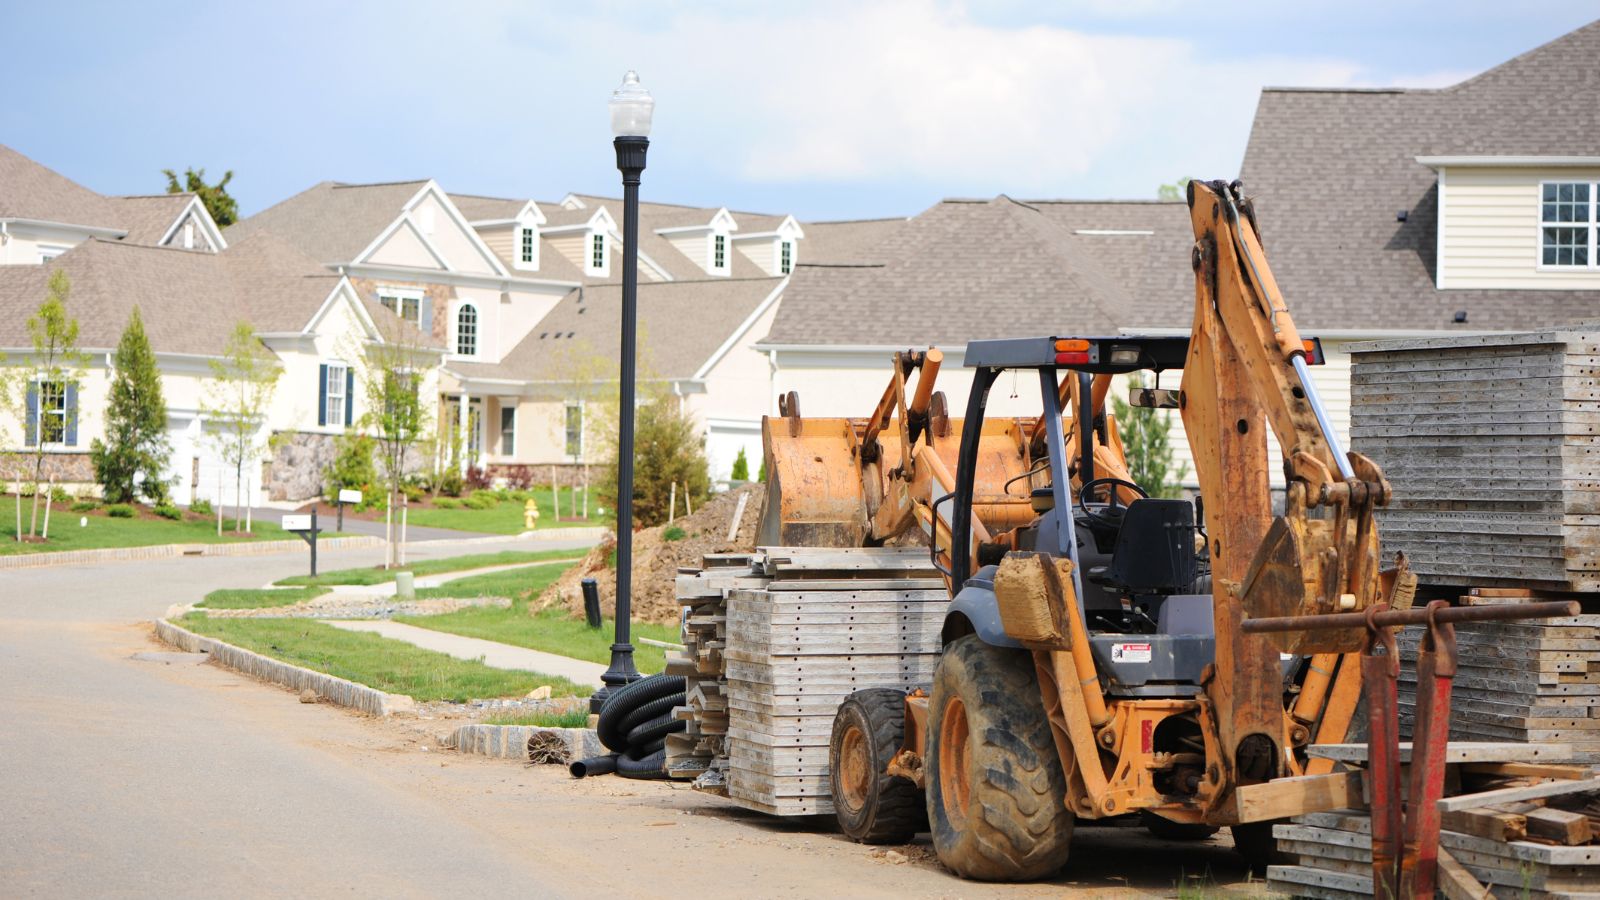 Will New Construction Nearby Affect My Home's Value?